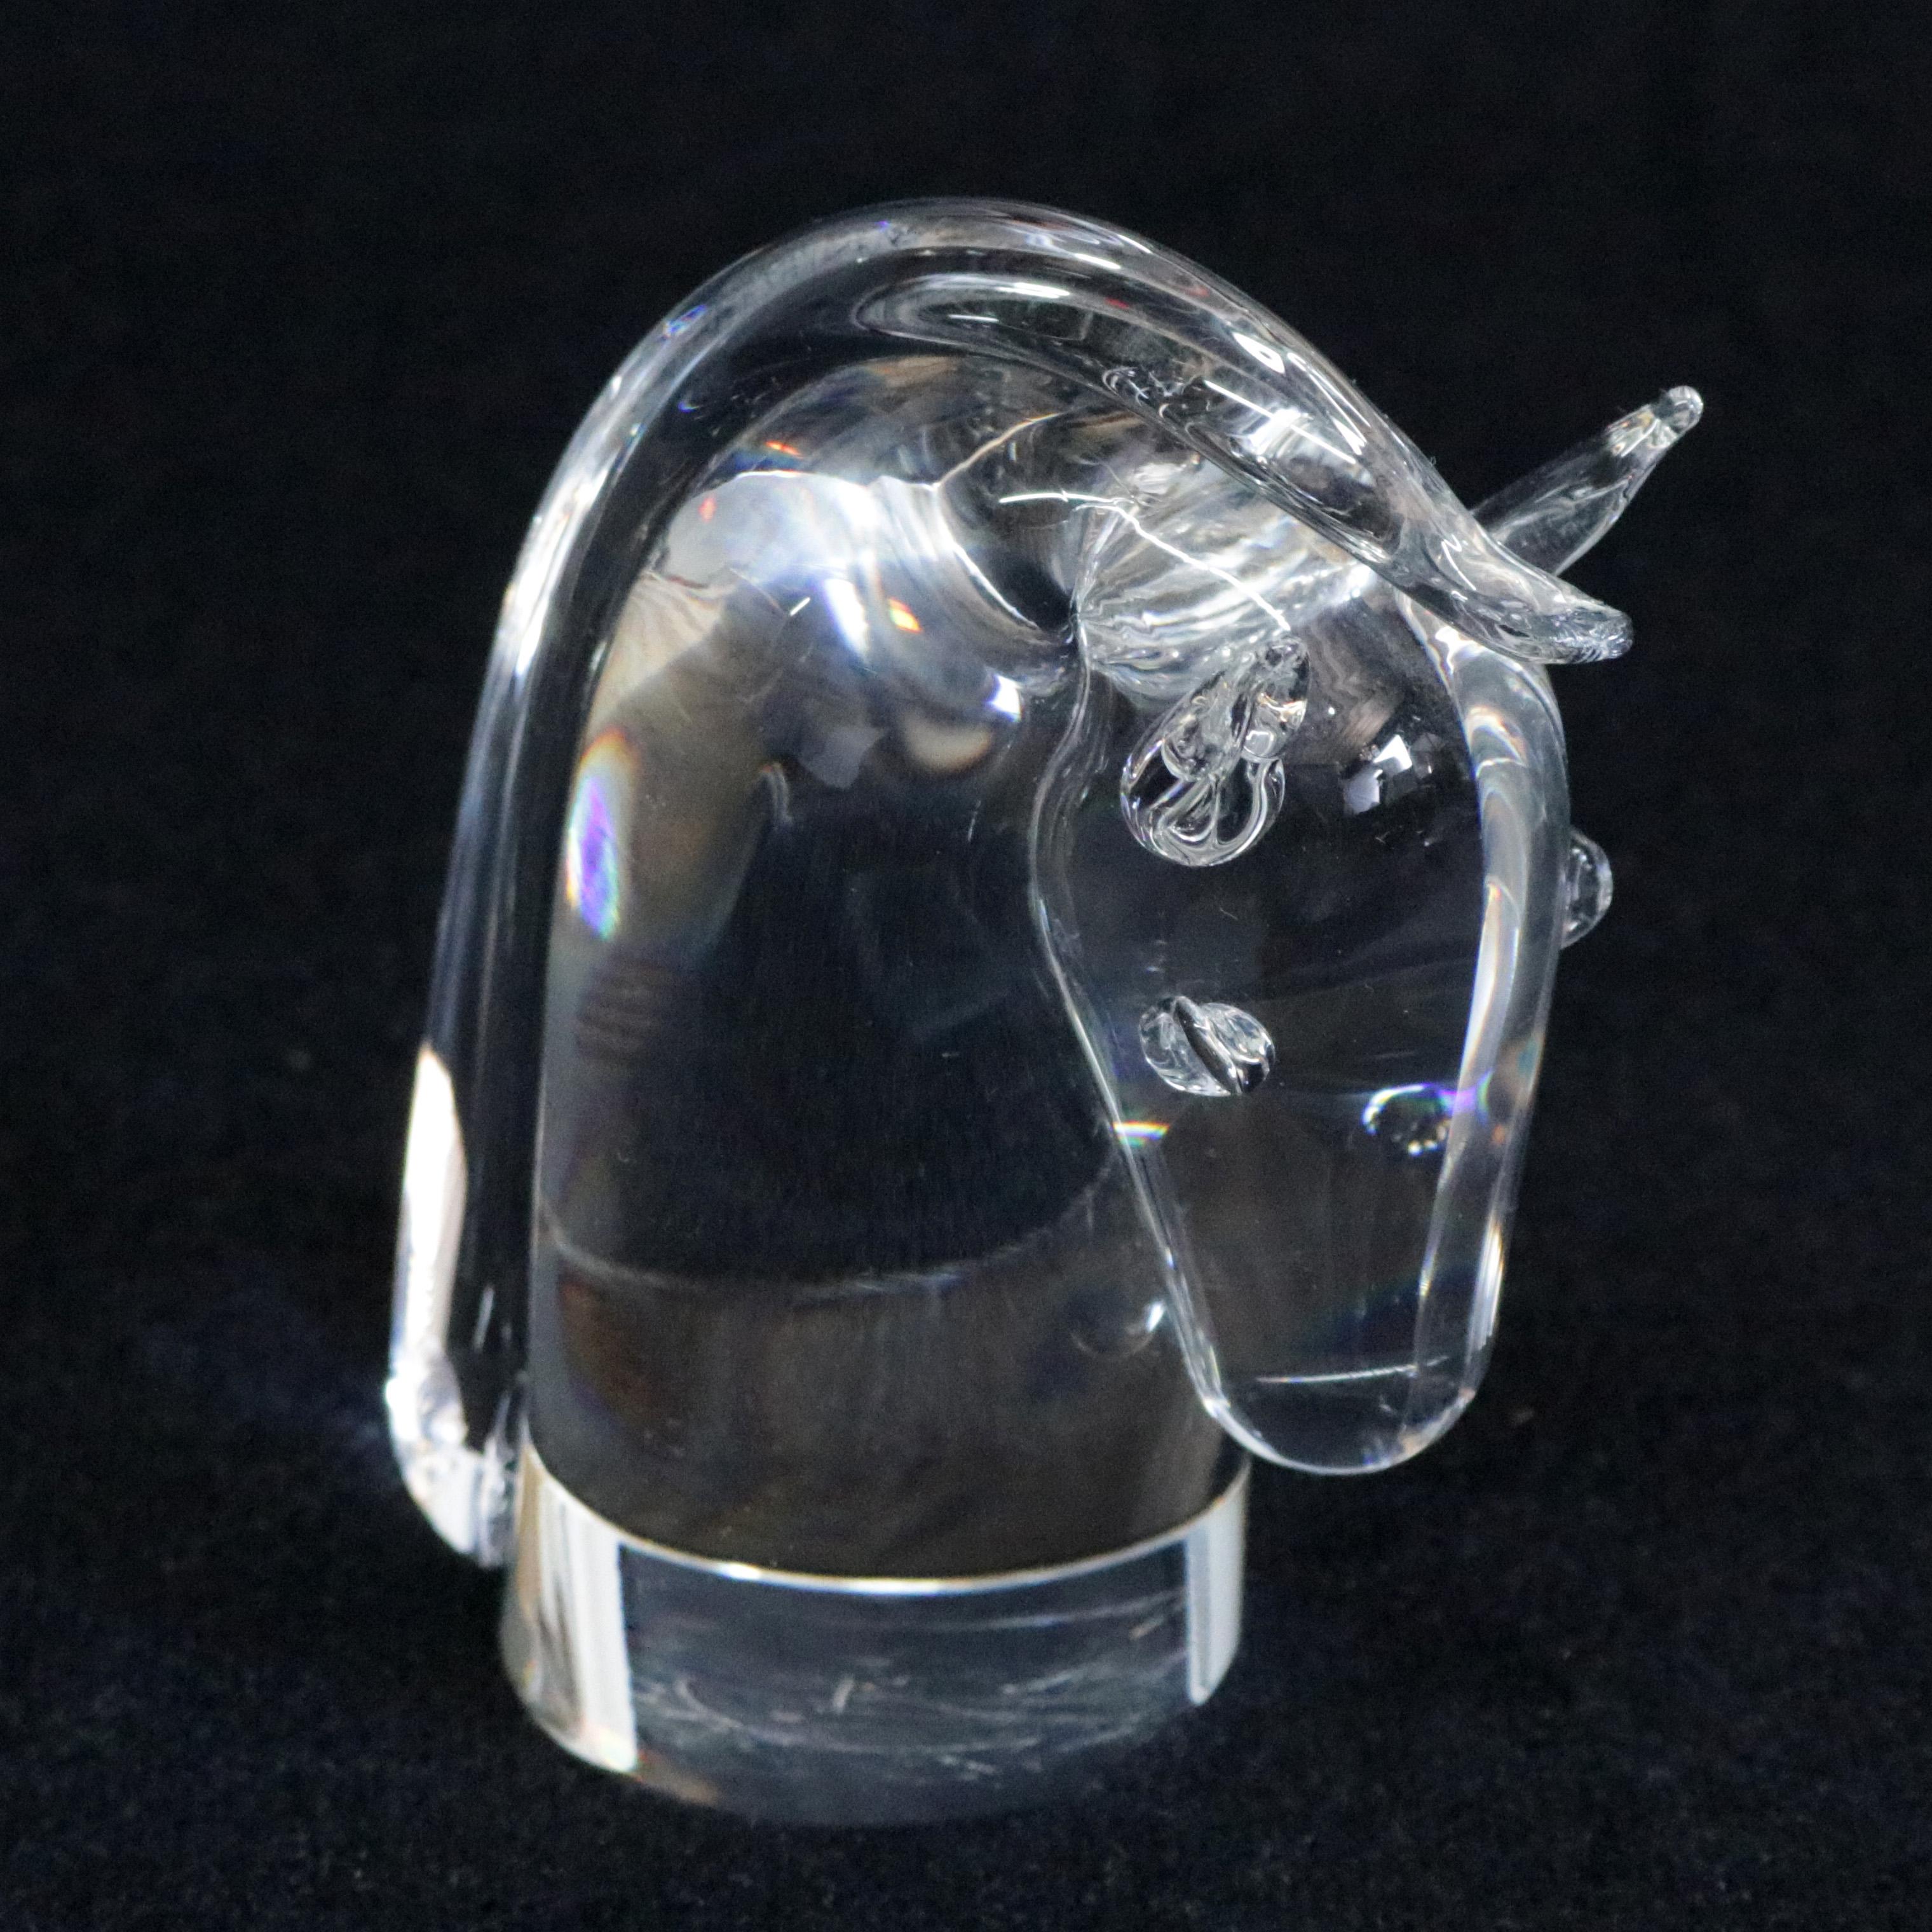 Midcentury Steuben figurative mouth blown crystal sculptural equine paperweight features colorless art glass in form of Horse Head designed by David Dowler for Corning Museum of Glass, New York, NY, signed on base, 20th century.
 

Measures: 4.5